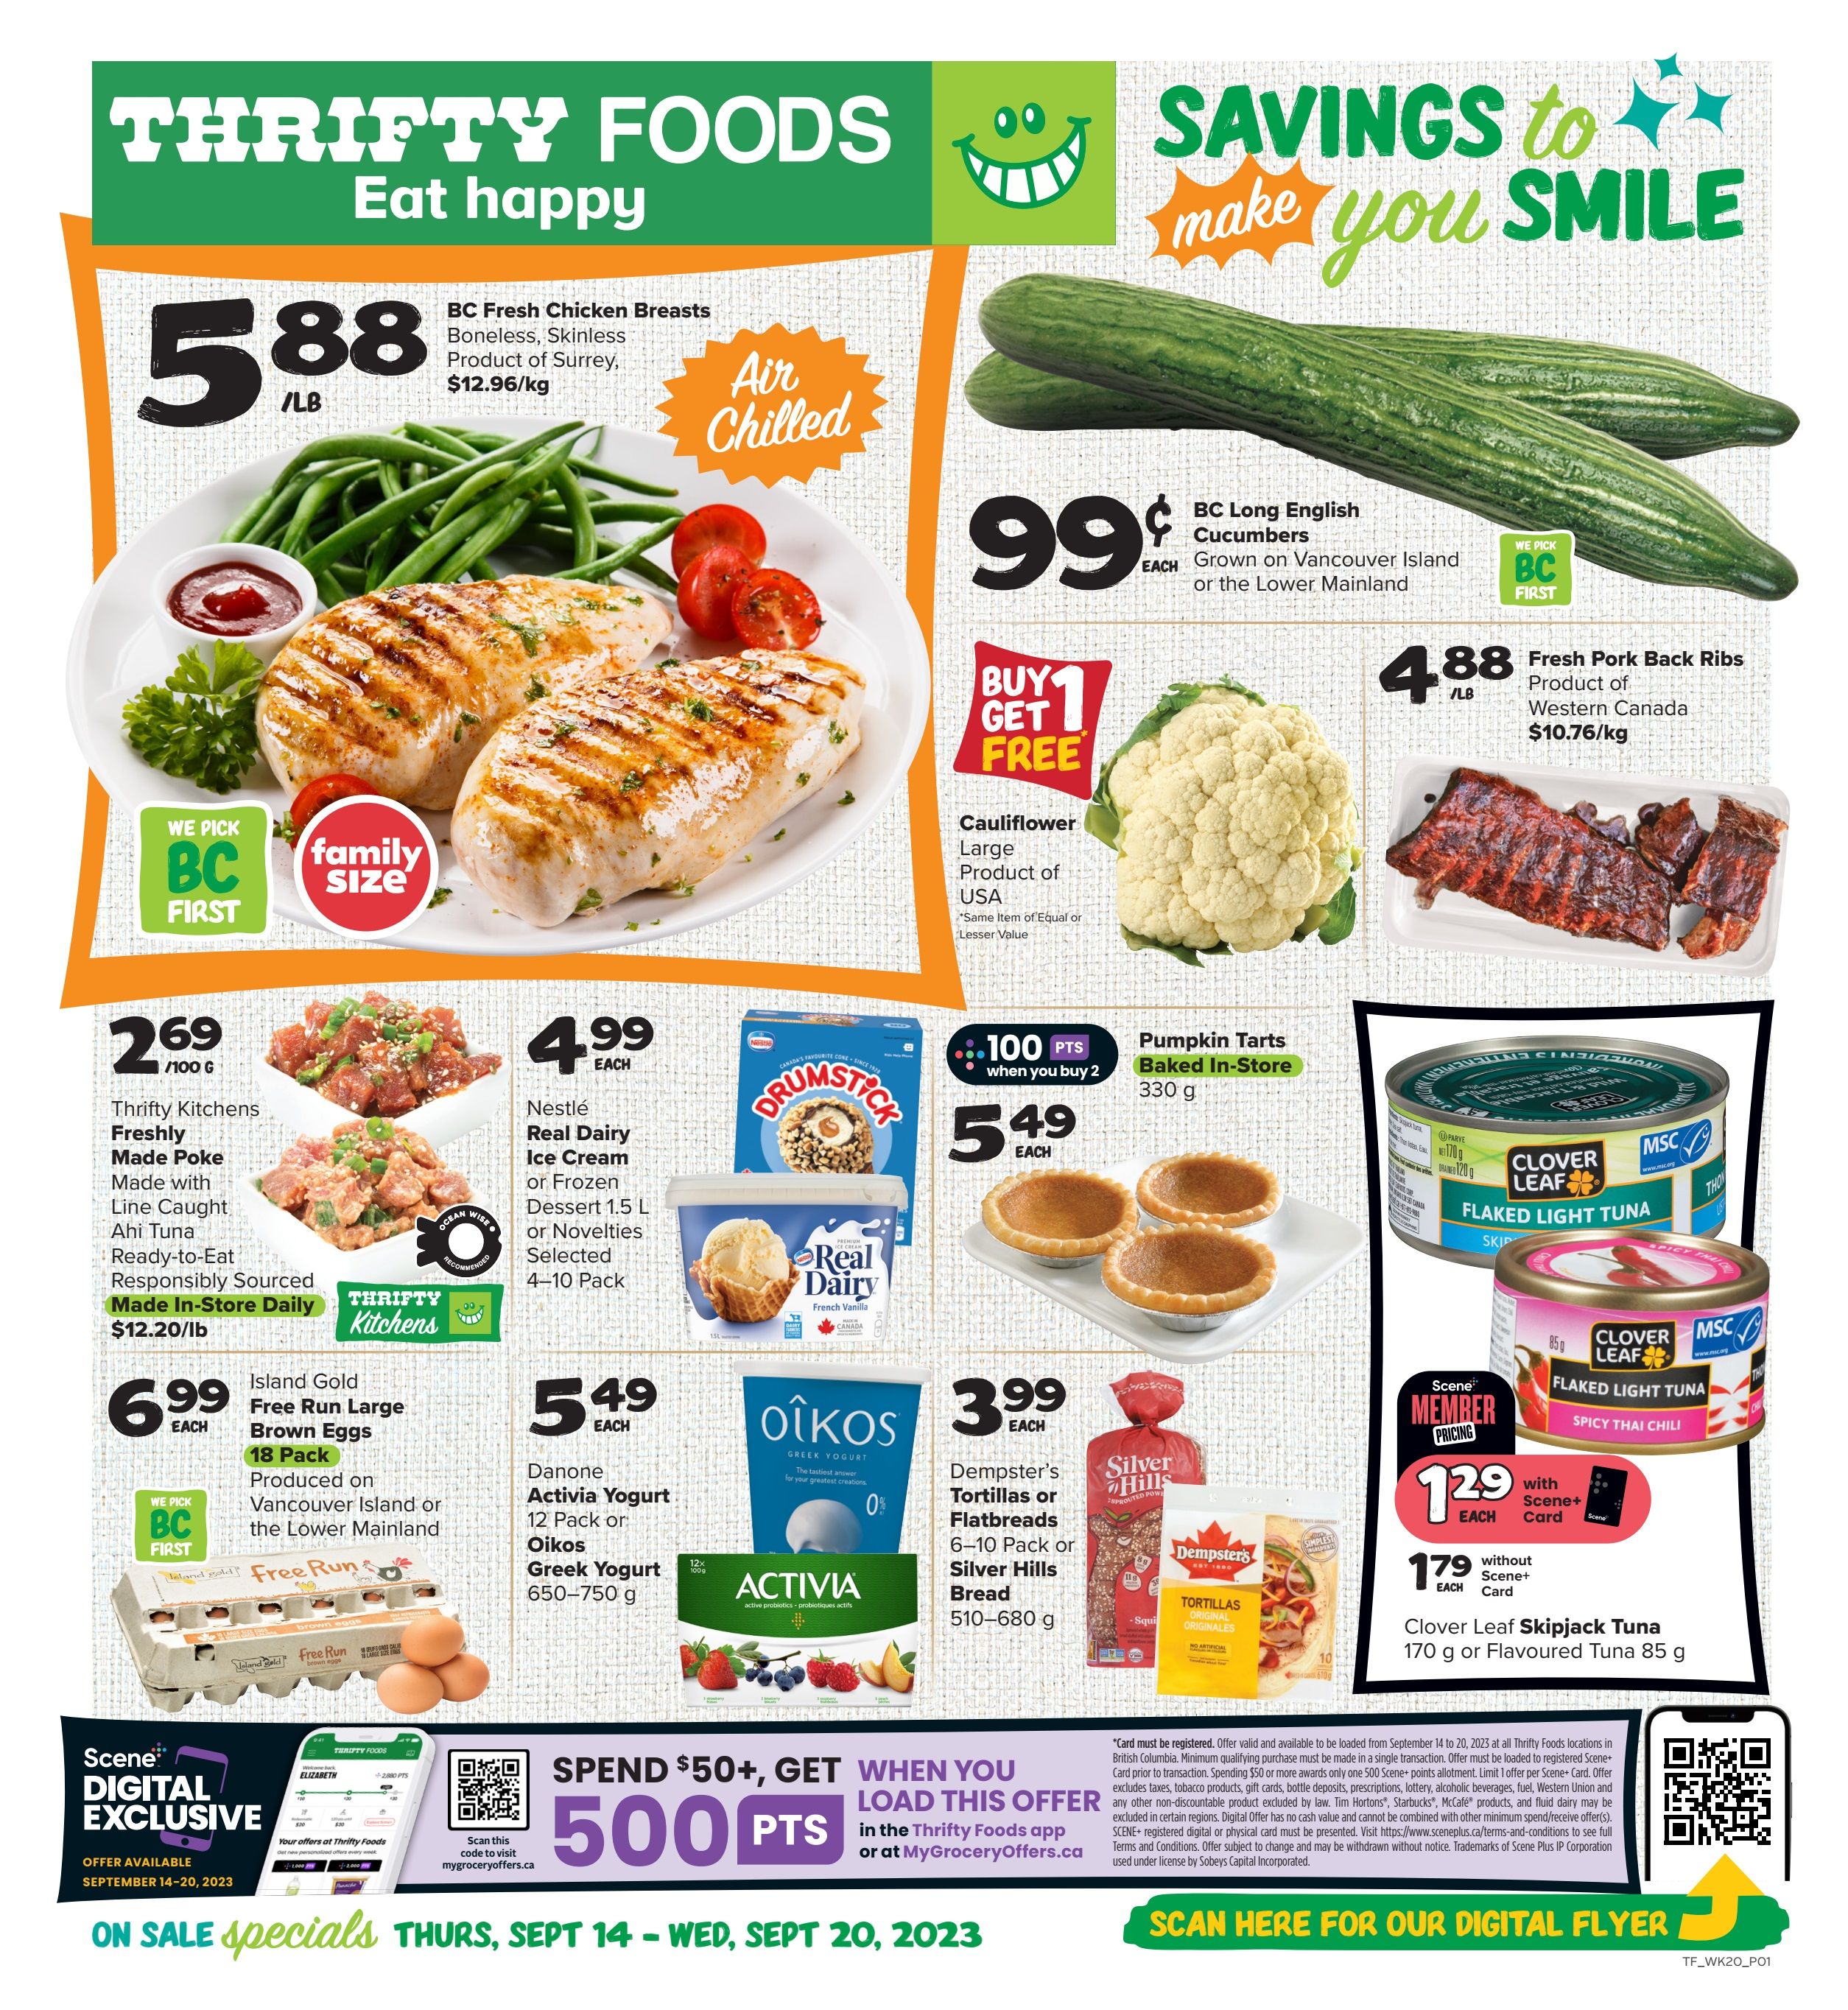 Thrifty food discounts